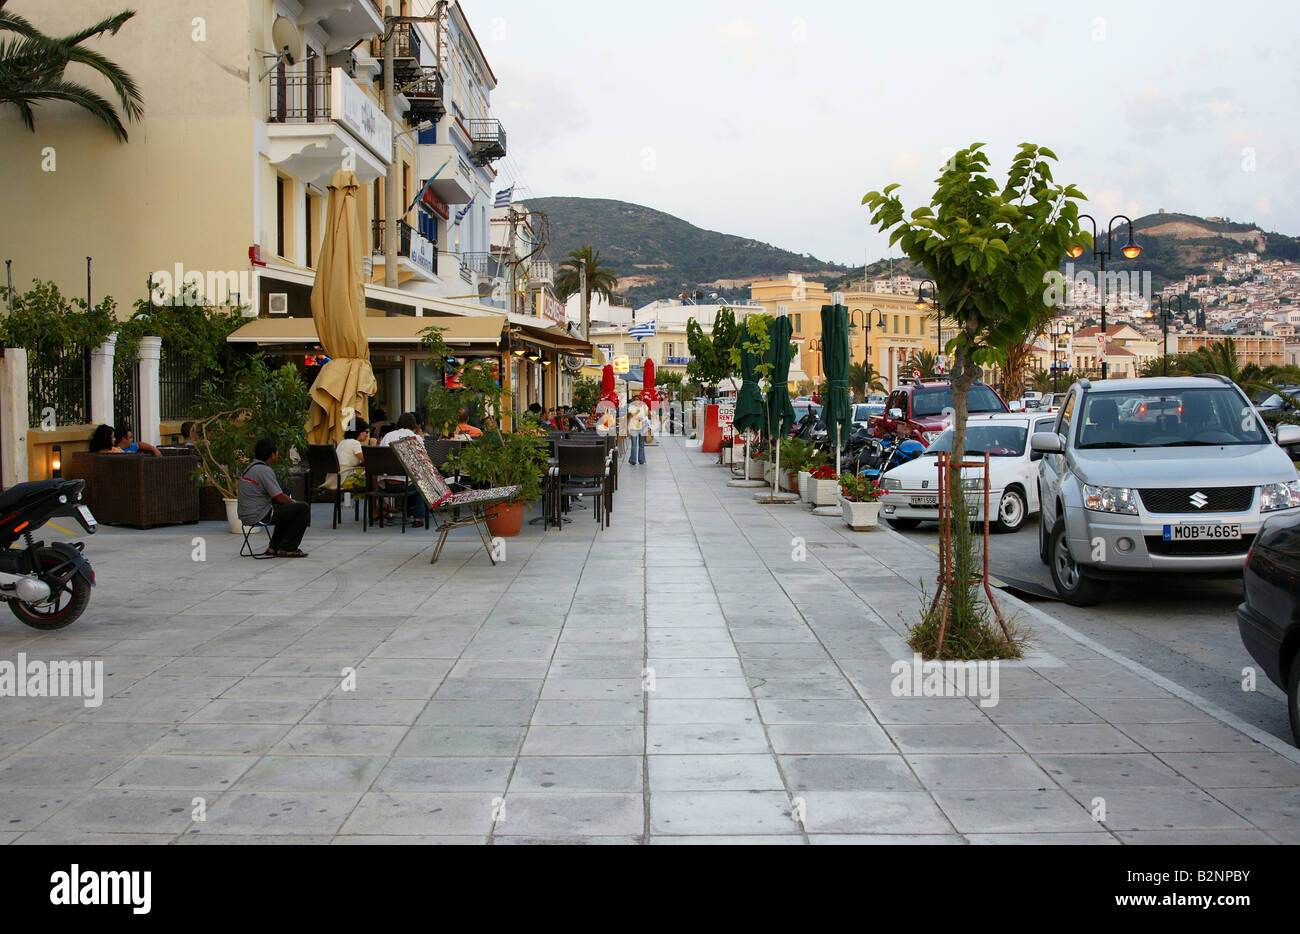 Street scene in Samos town centre in Greece where cafes line the street Stock Photo